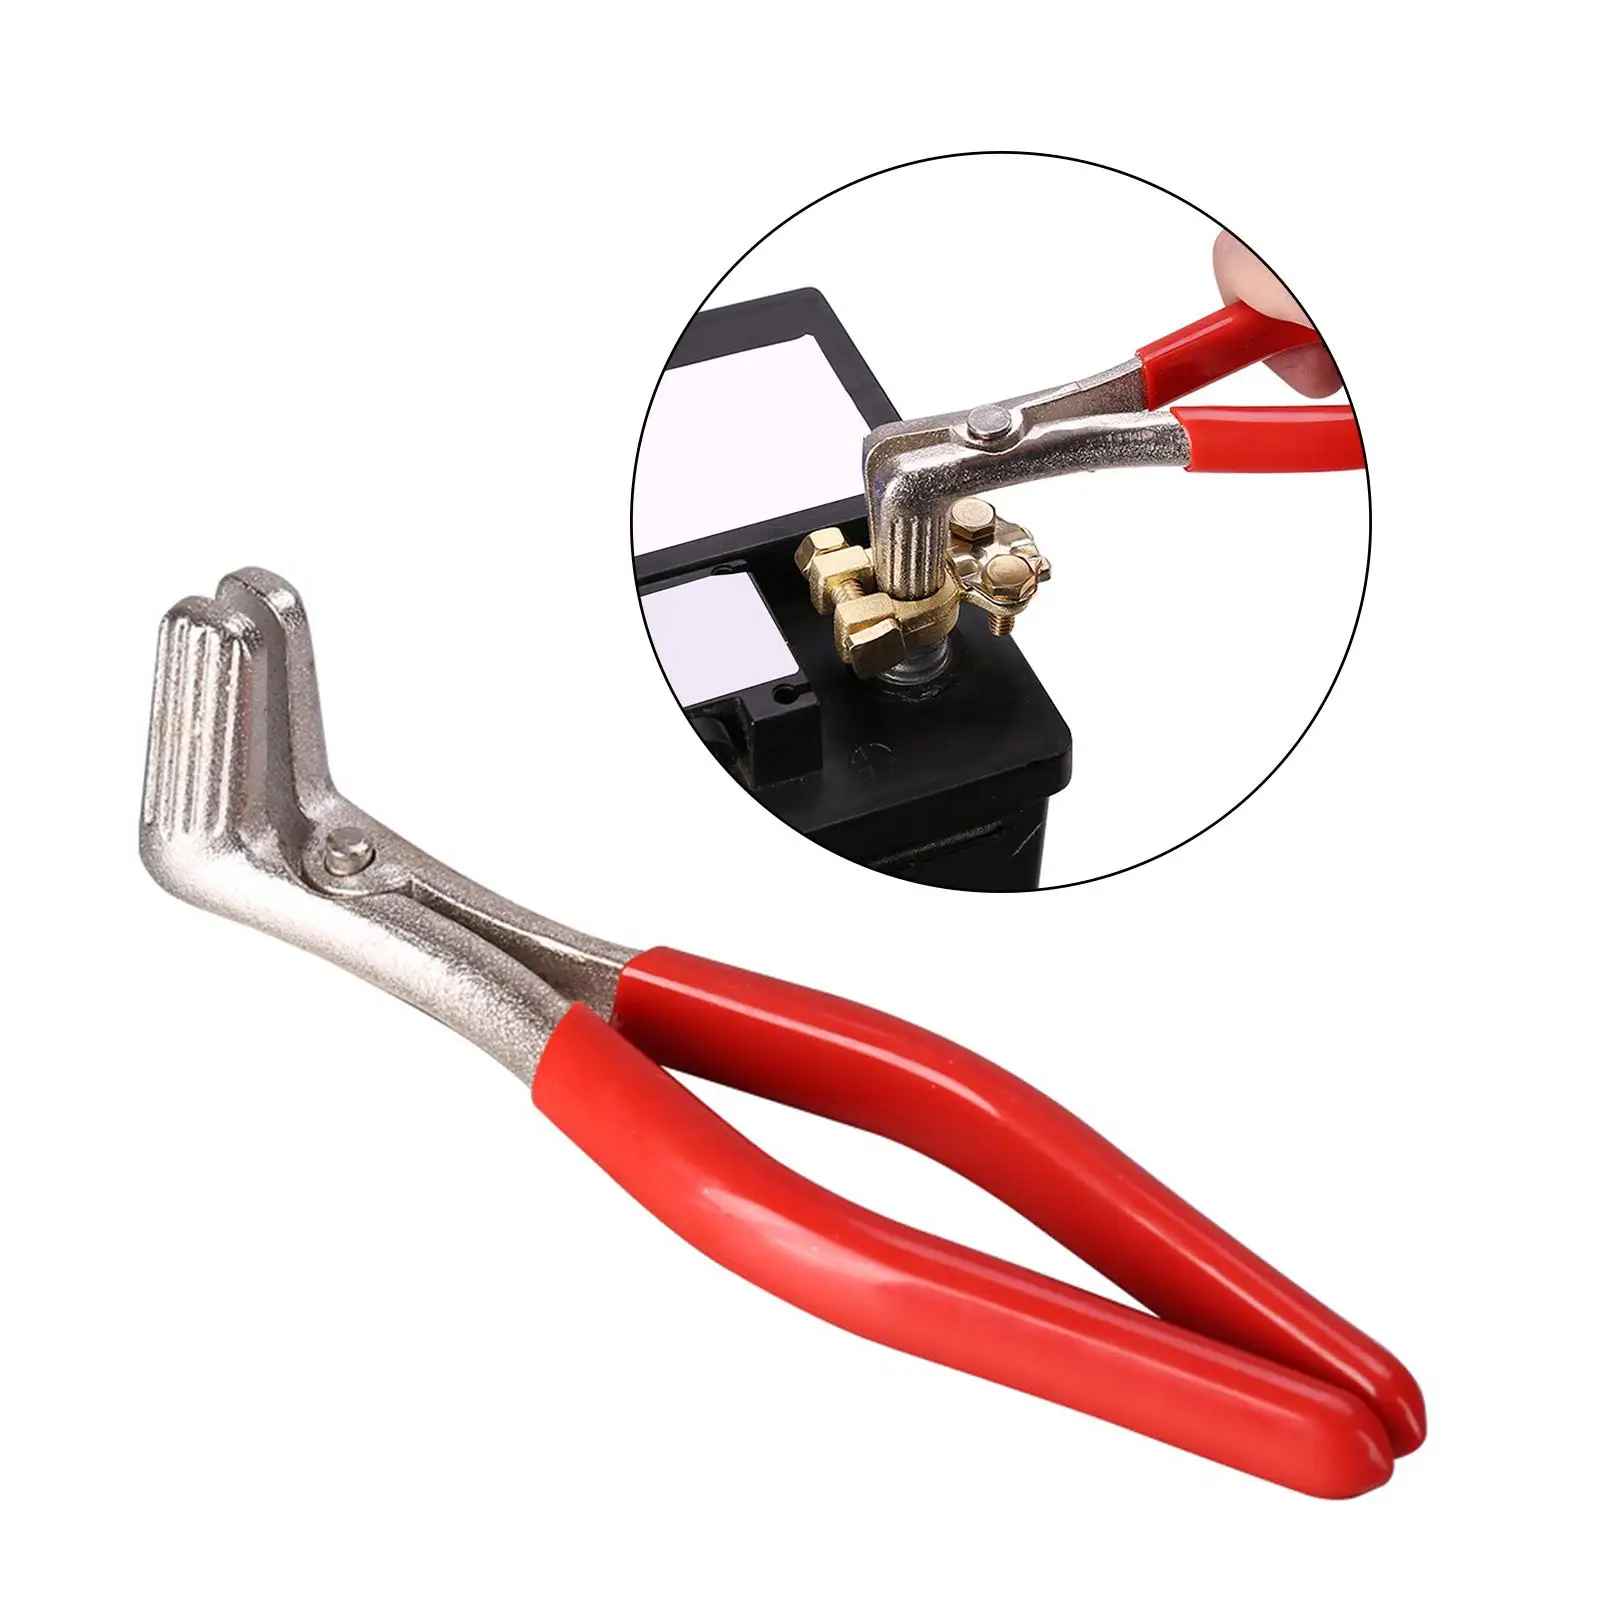 Auto Battery Pliers Labor Saving Angled Head Manual Tool Battery Terminal Spreader for Truck Boat UTV Accessories